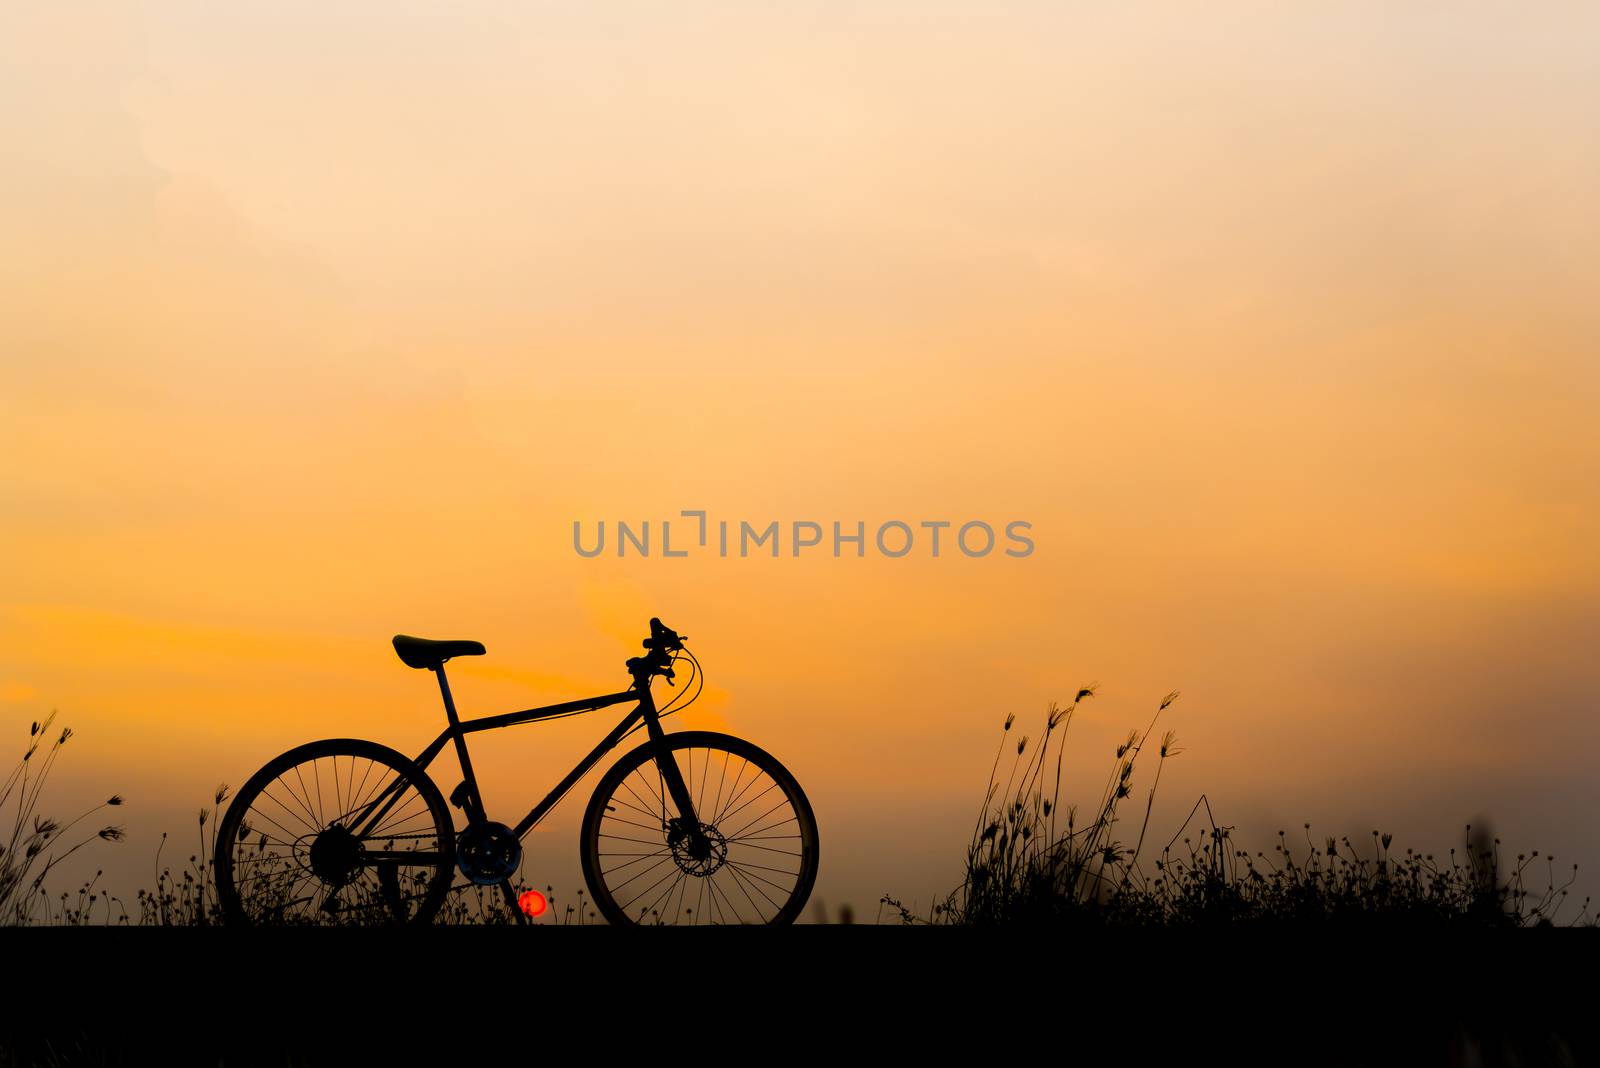 Sunset silhouette and bicycle on beautiful sky by anatskwong